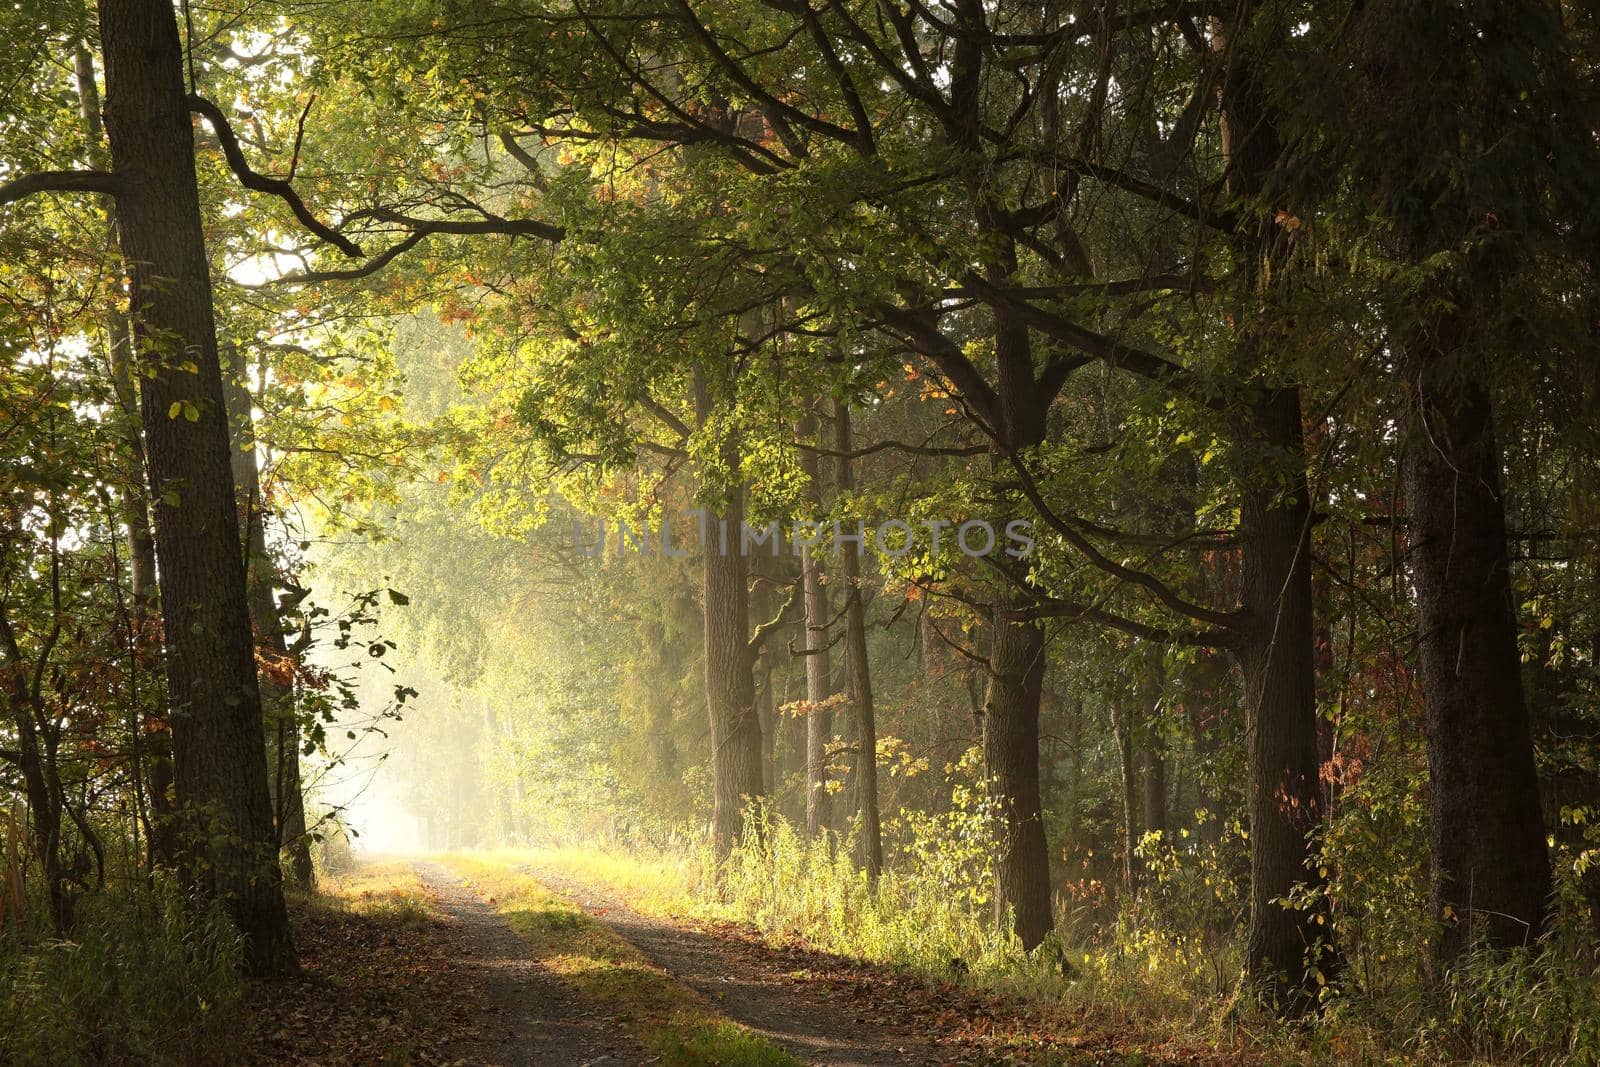 Country road through the autumn forest on a foggy morning